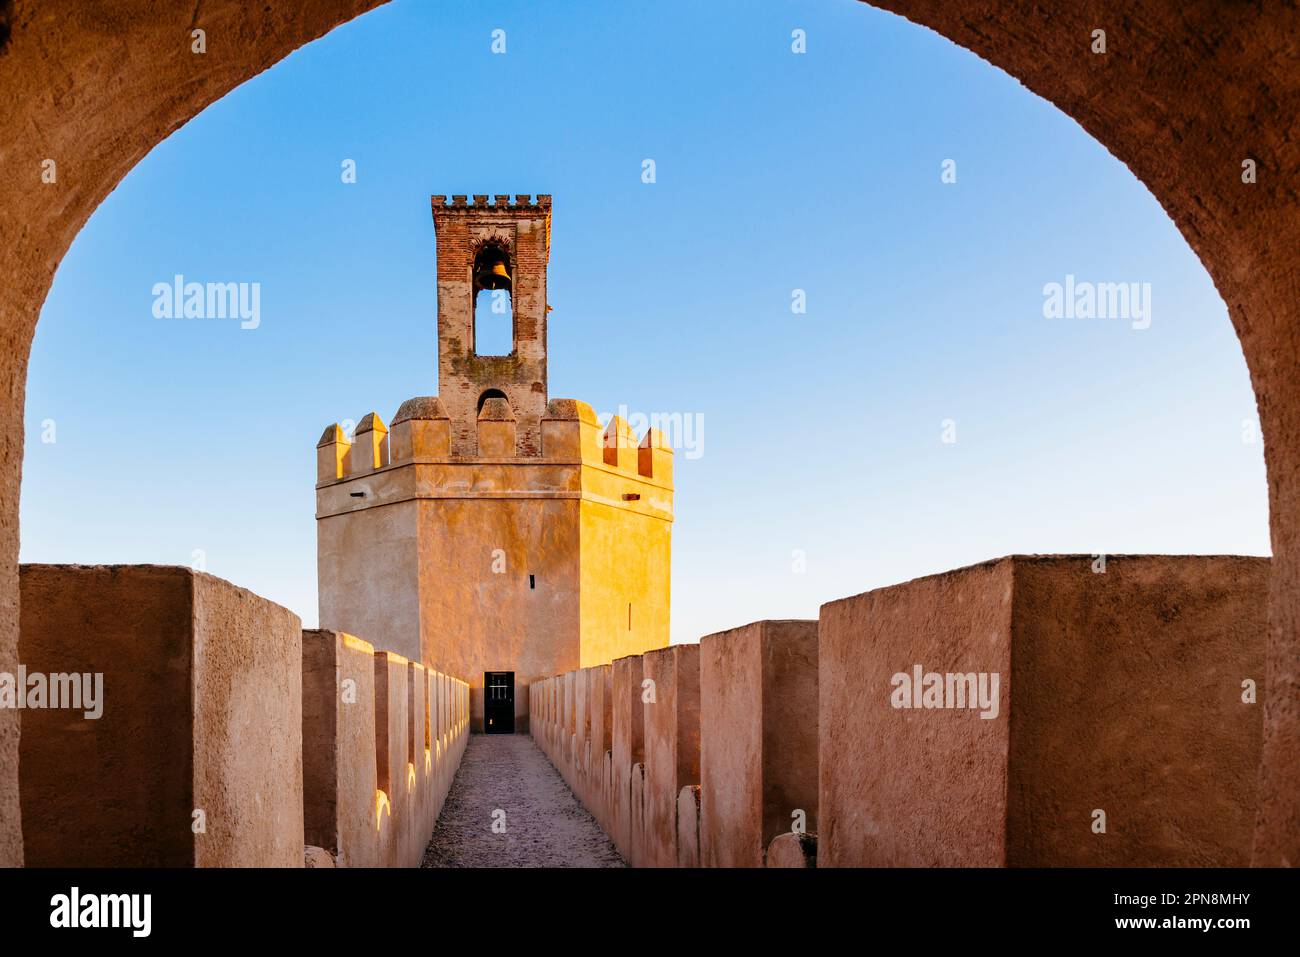 The Torre de Espantaperros or Torre de la Atalaya, is a watchtower located next to the citadel of Badajoz, 10th century. It is of Almohad origin and h Stock Photo